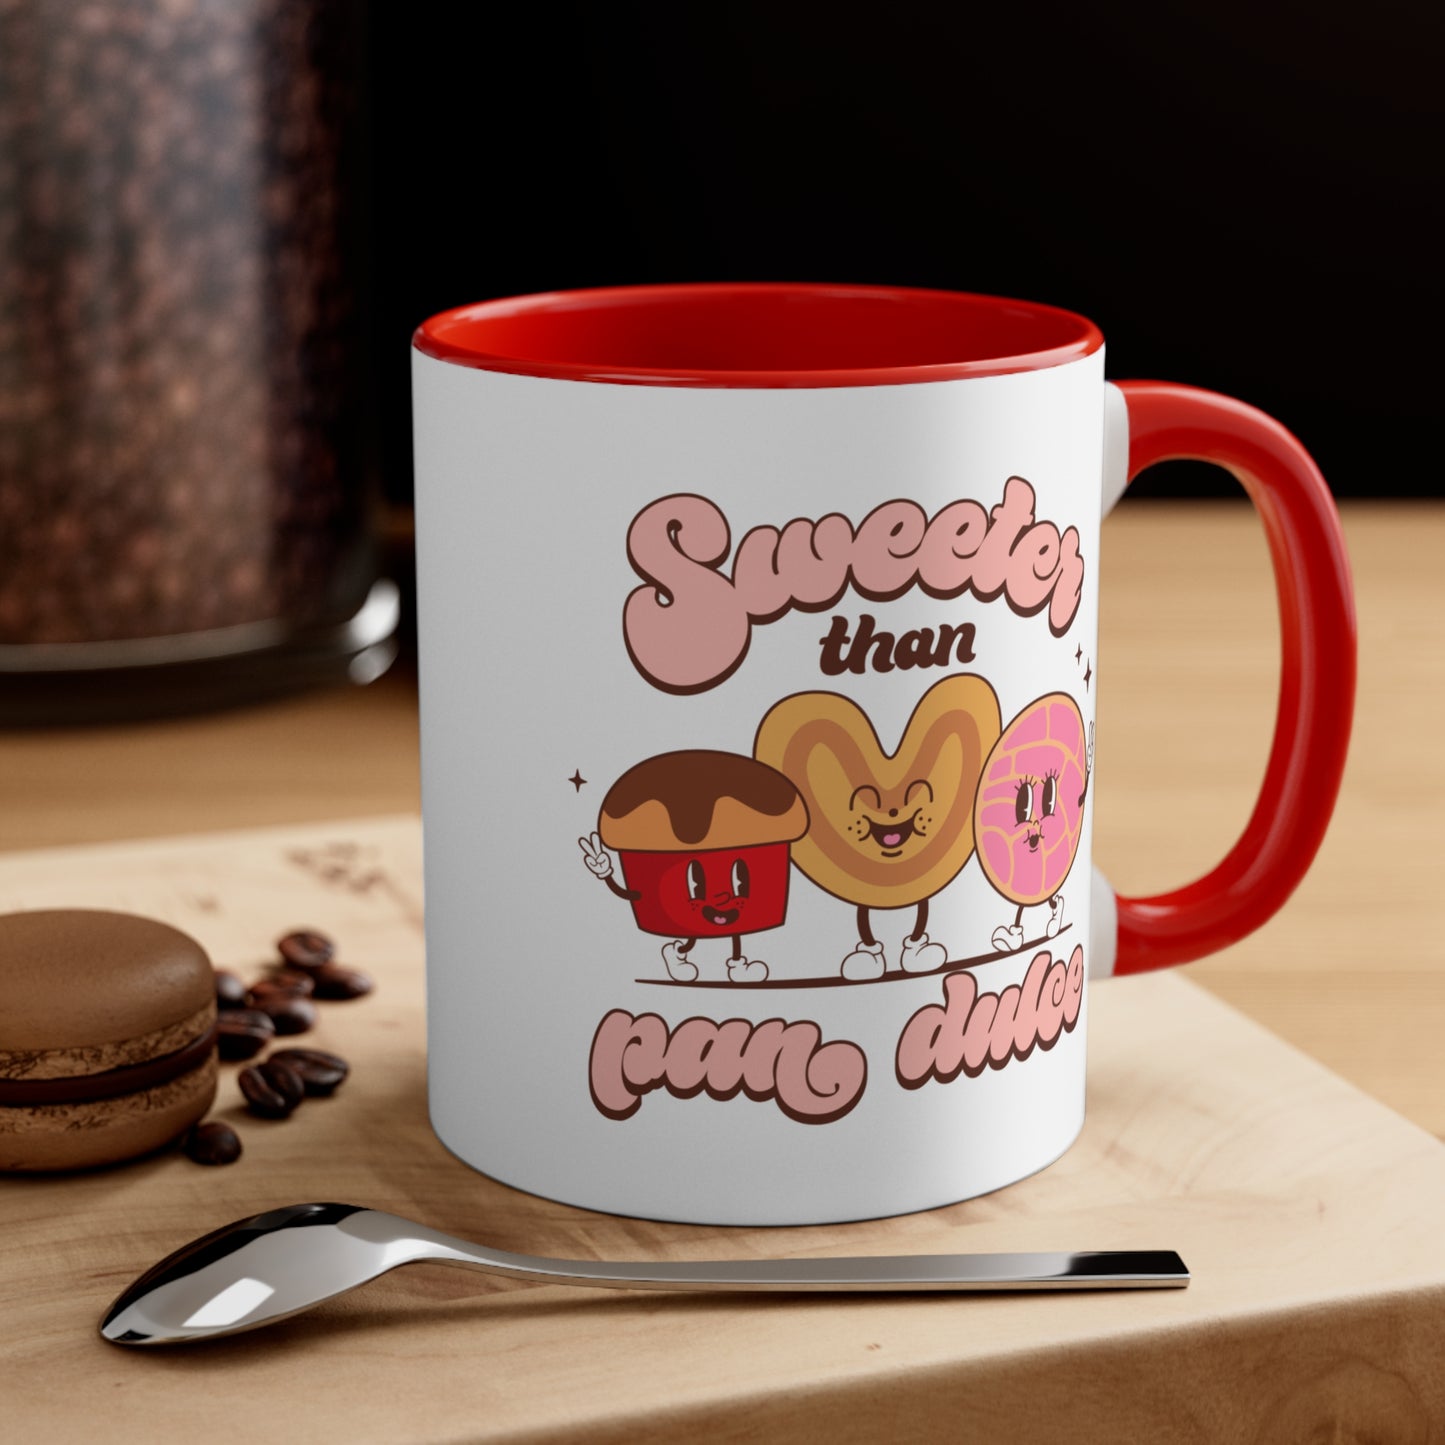 Sweeter than pan dulce Coffee Mug, 11oz for Mexican mom, Mexican friend or Mexican family.